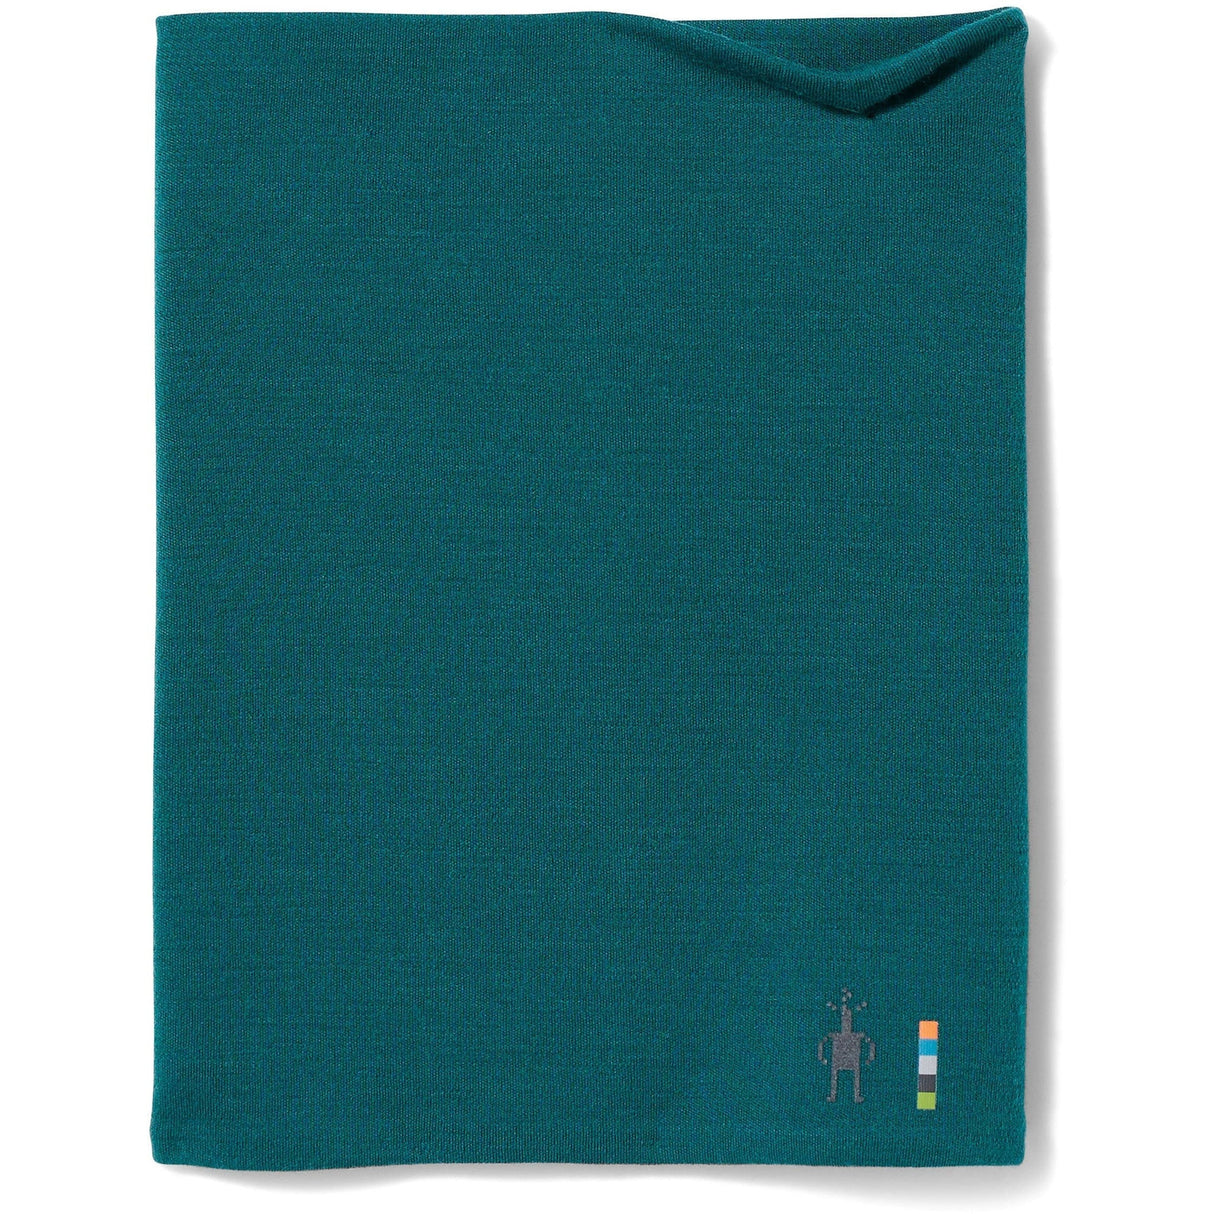 Smartwool Thermal Merino Reversible Neck Gaiter  -  One Size Fits Most / Emerald Green